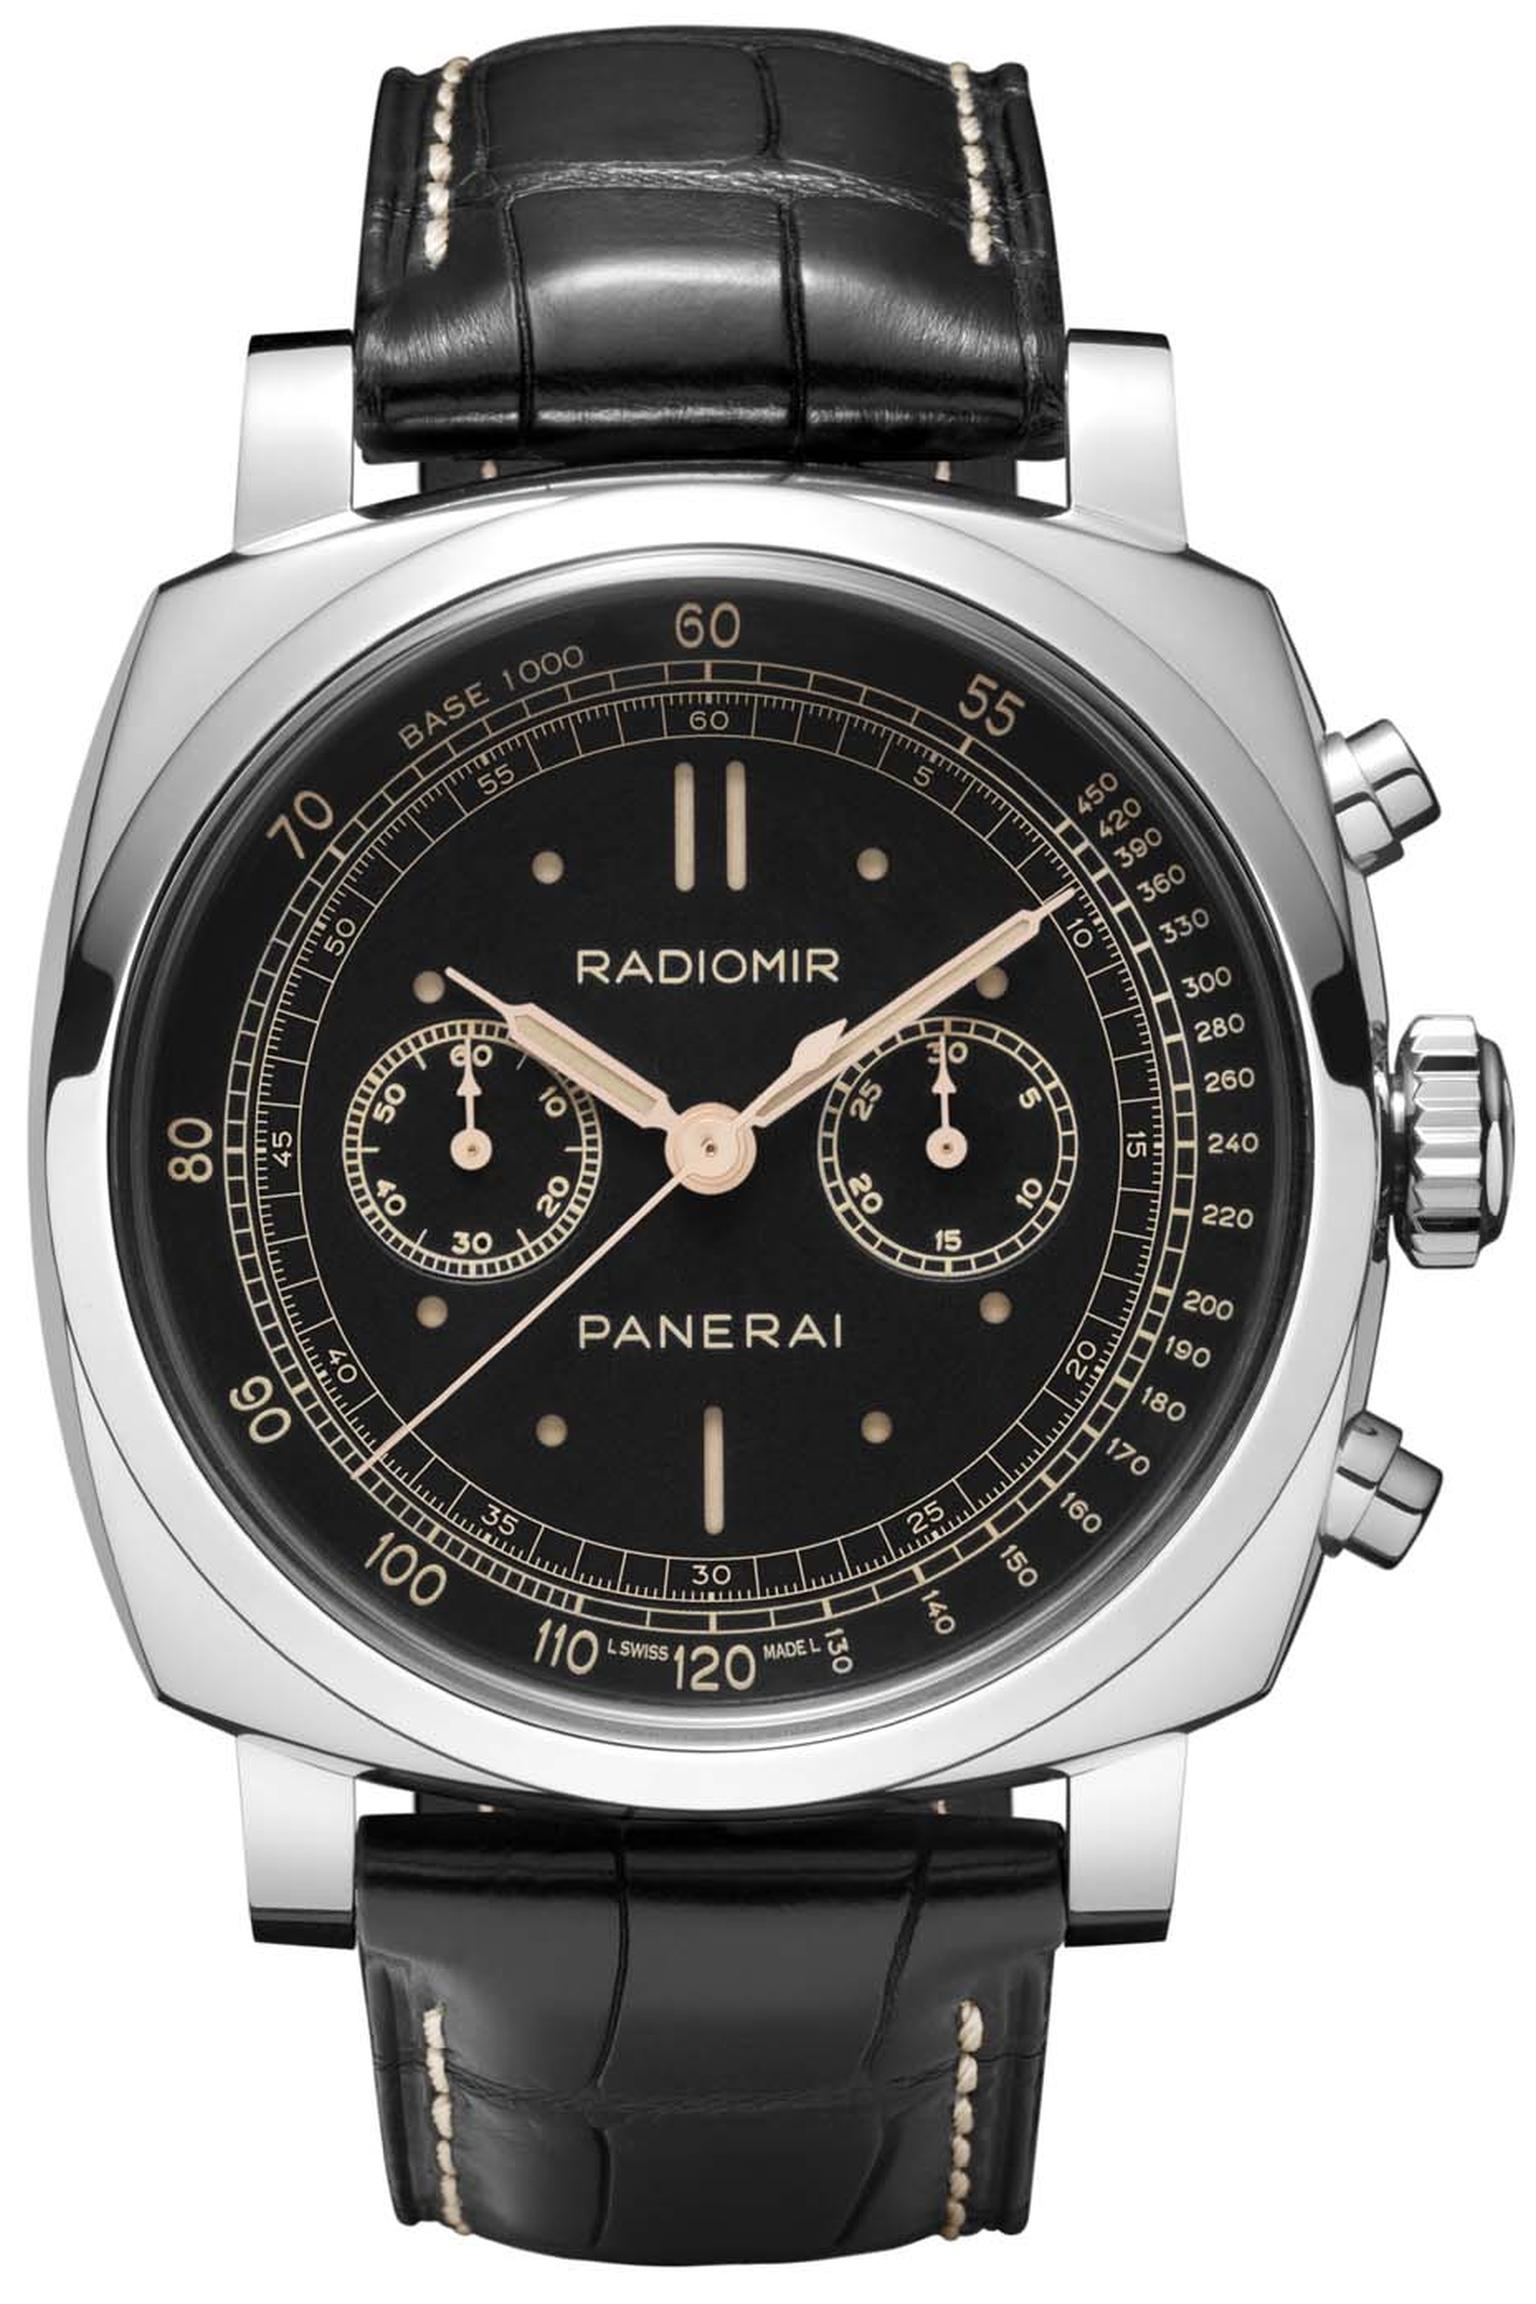 Panerai's 45mm Radiomir watch, a limited edition of 100, features a white gold cushion-shaped case with vintage touches.